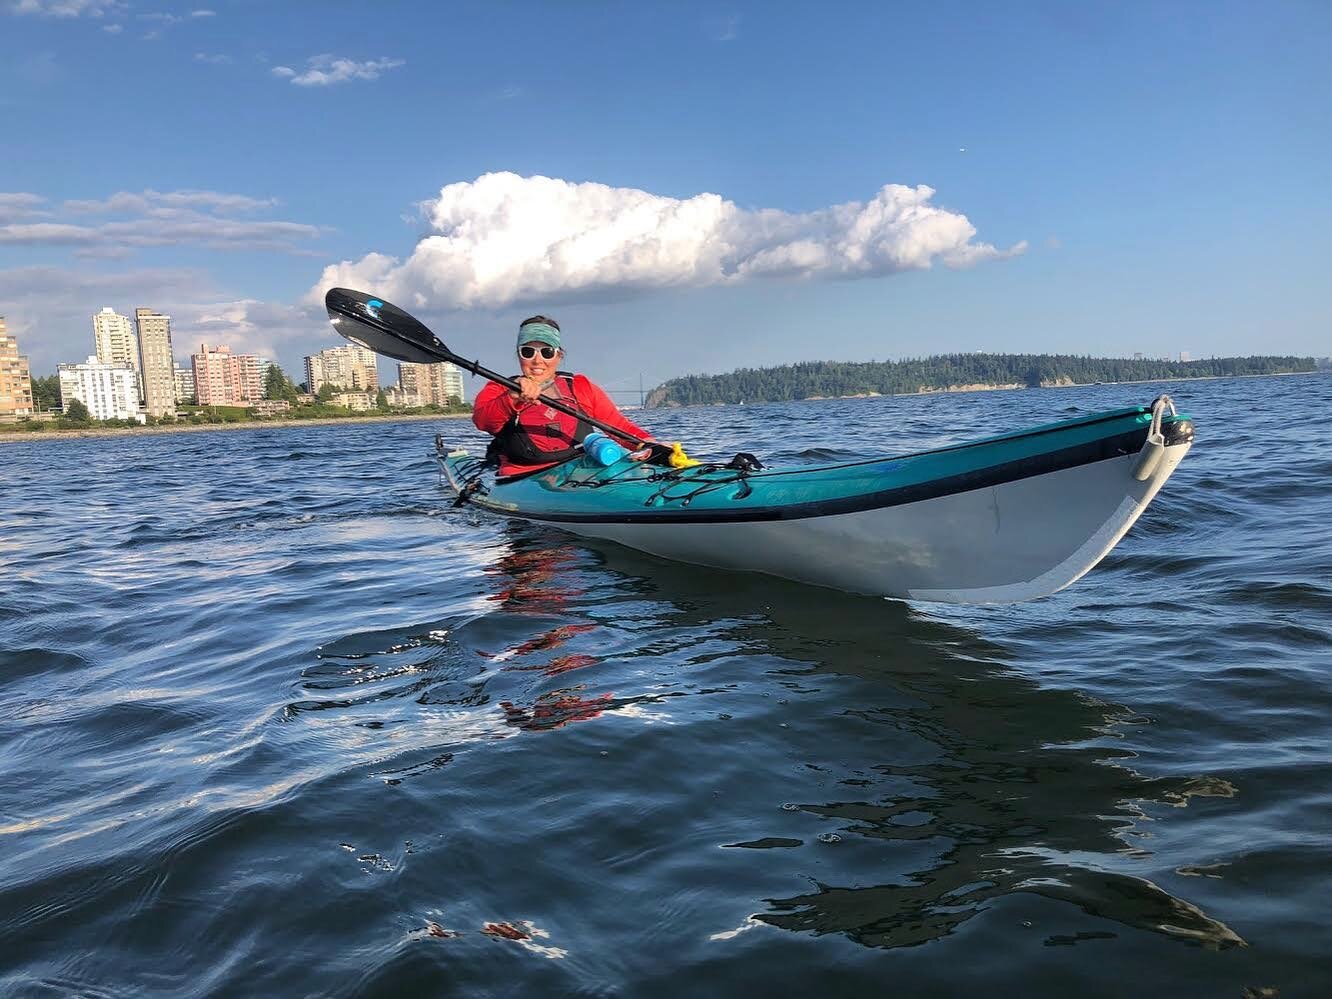 Let&rsquo;s get out there! 

#hollyburnsailingclub #kayaking #vancouver #westvancouver #watersports #summer